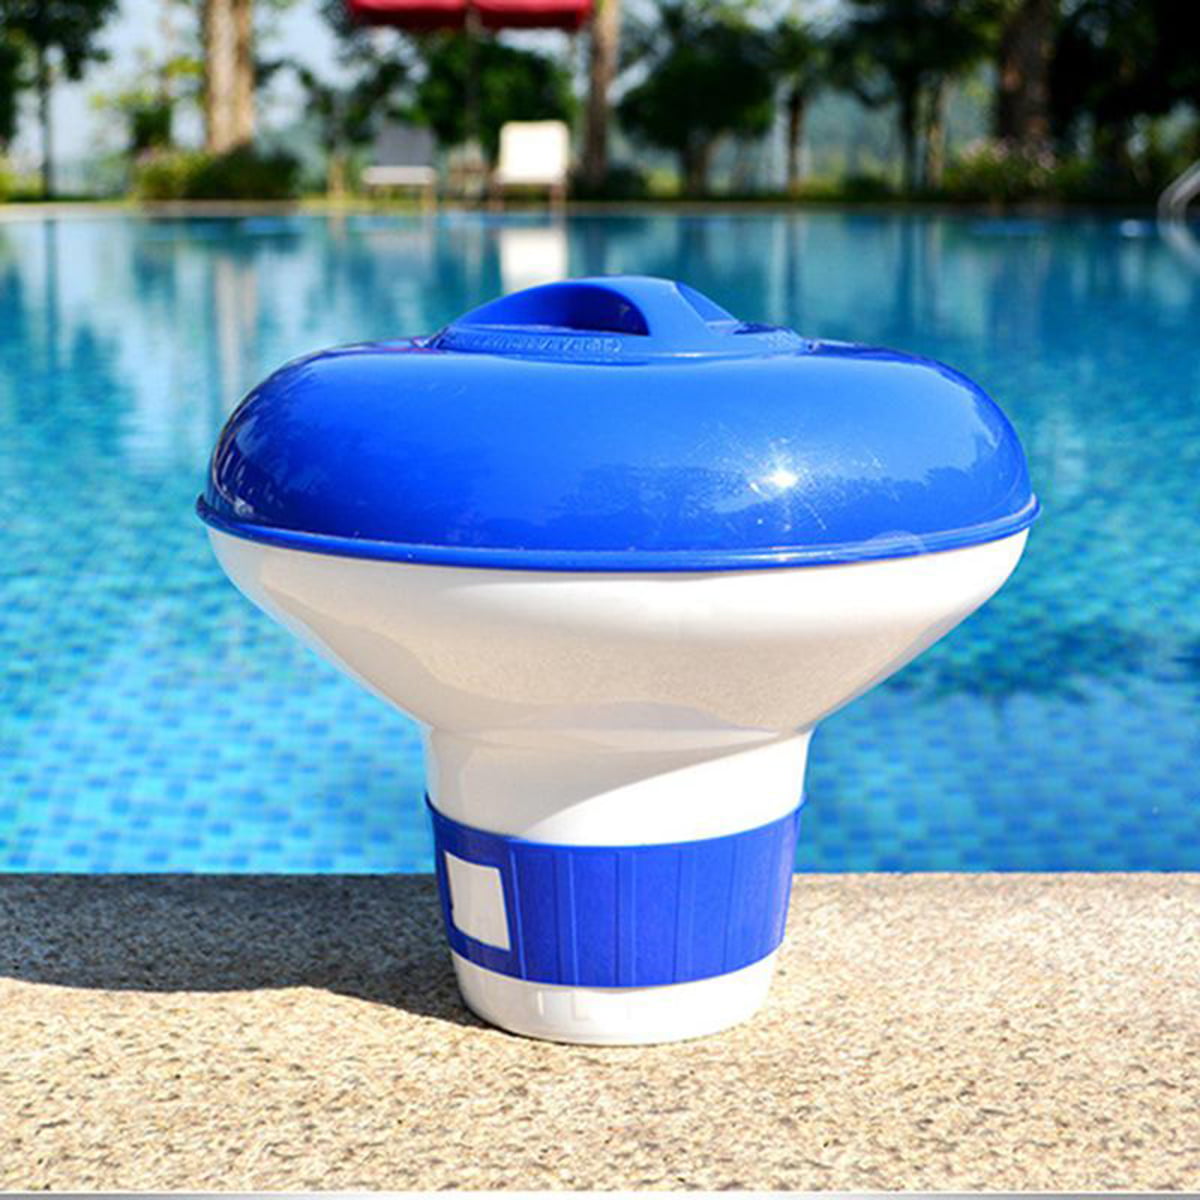 Fealay Chlorine Floater Floating Swimming Pool Chlorine Dispenser Mini Chlorine Tablet Dispenser for Pool Spa Jacuzzi Hot Tub and Fountain 